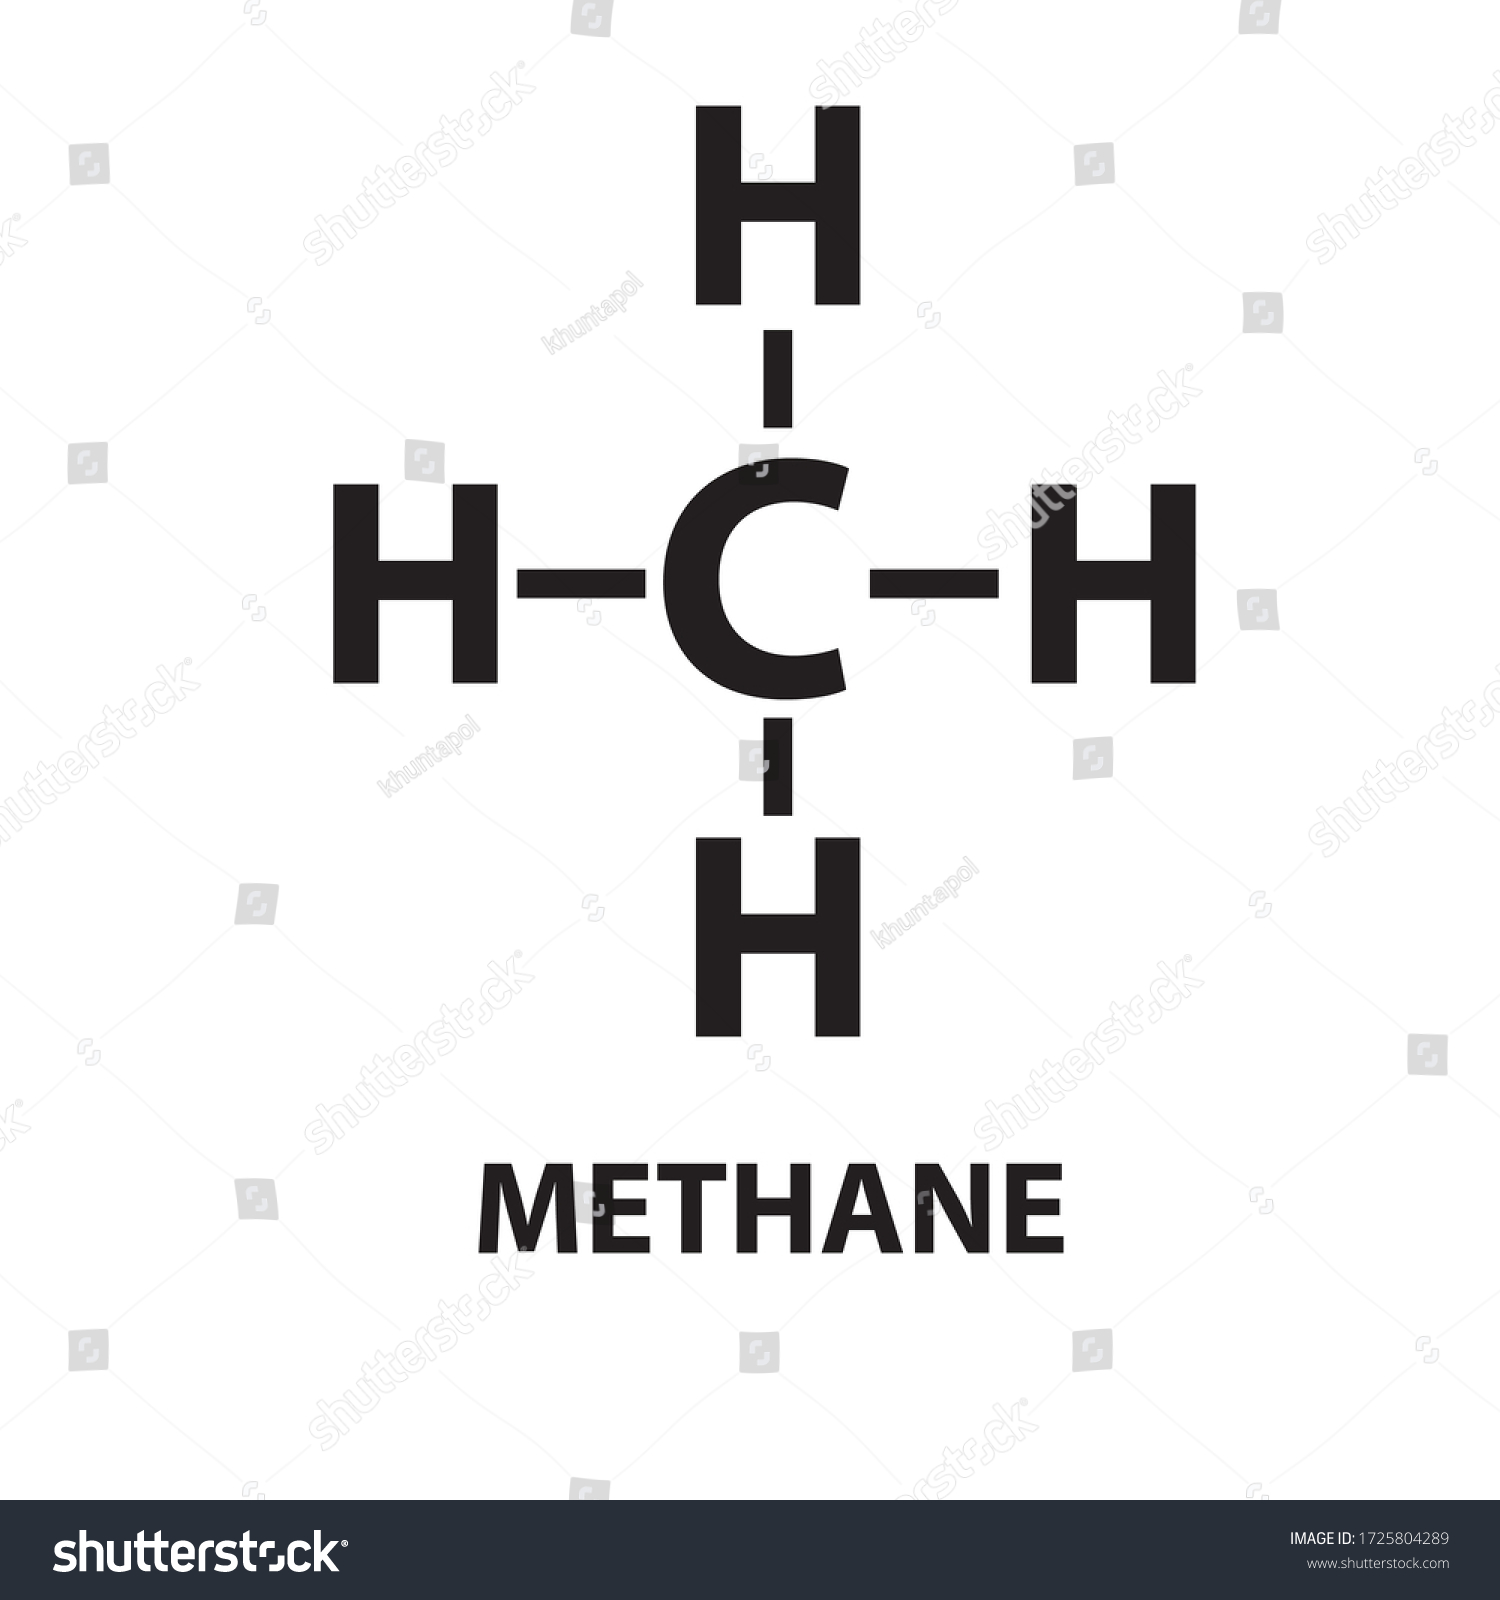 Vector of Methane chemical structure - Royalty Free Stock Vector ...